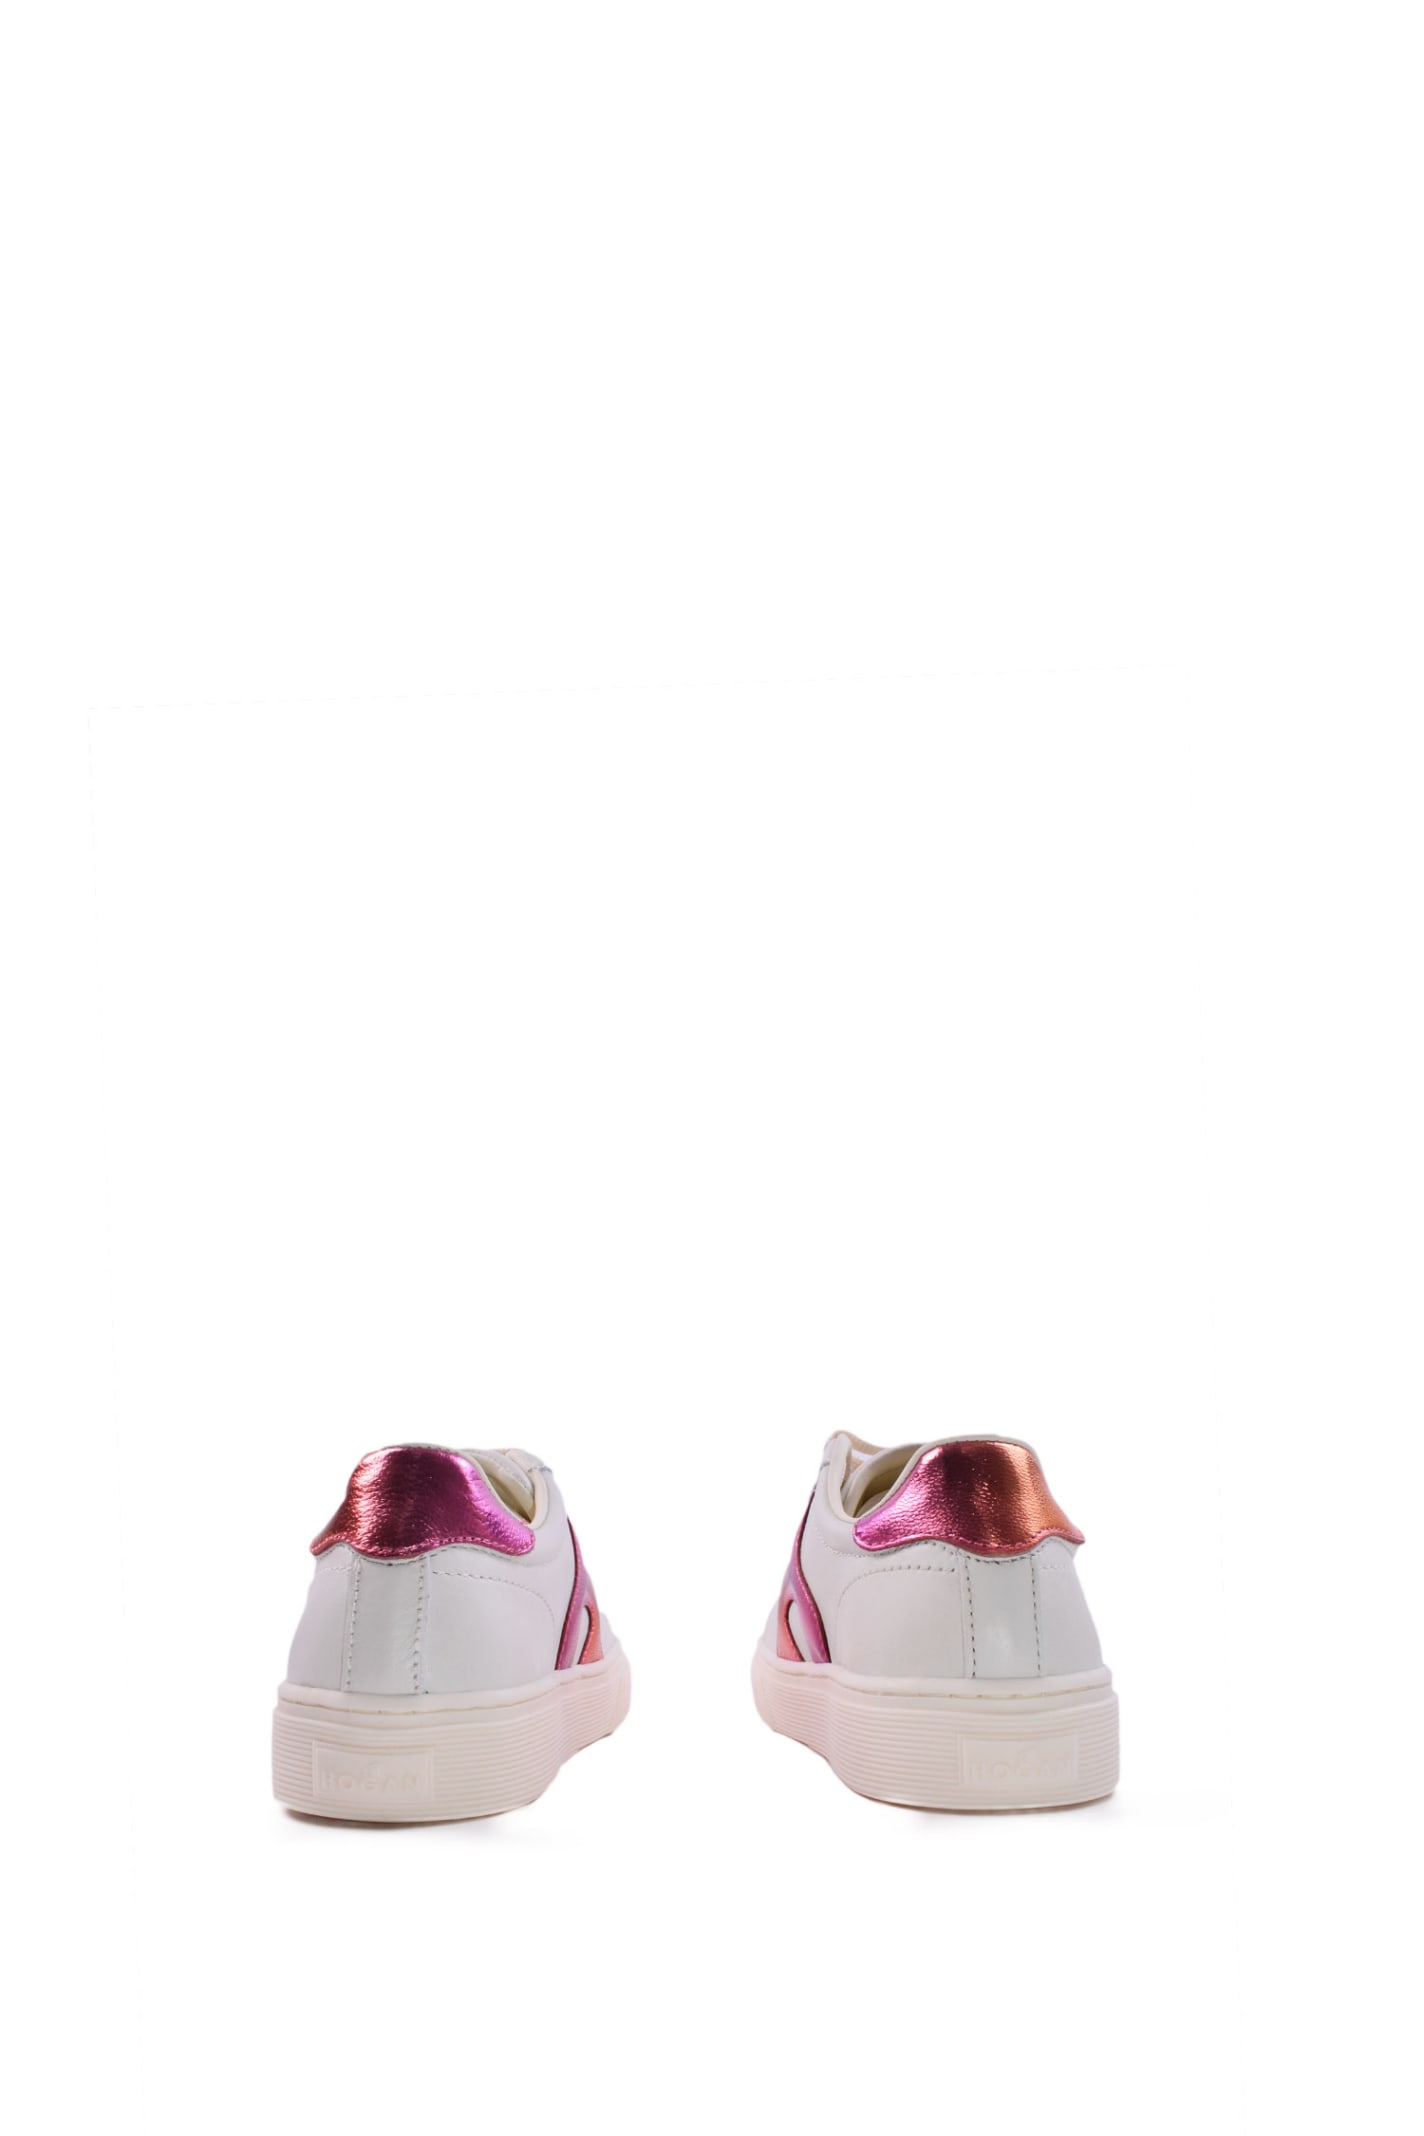 Shop Hogan J340 Sneakers In Leather In White